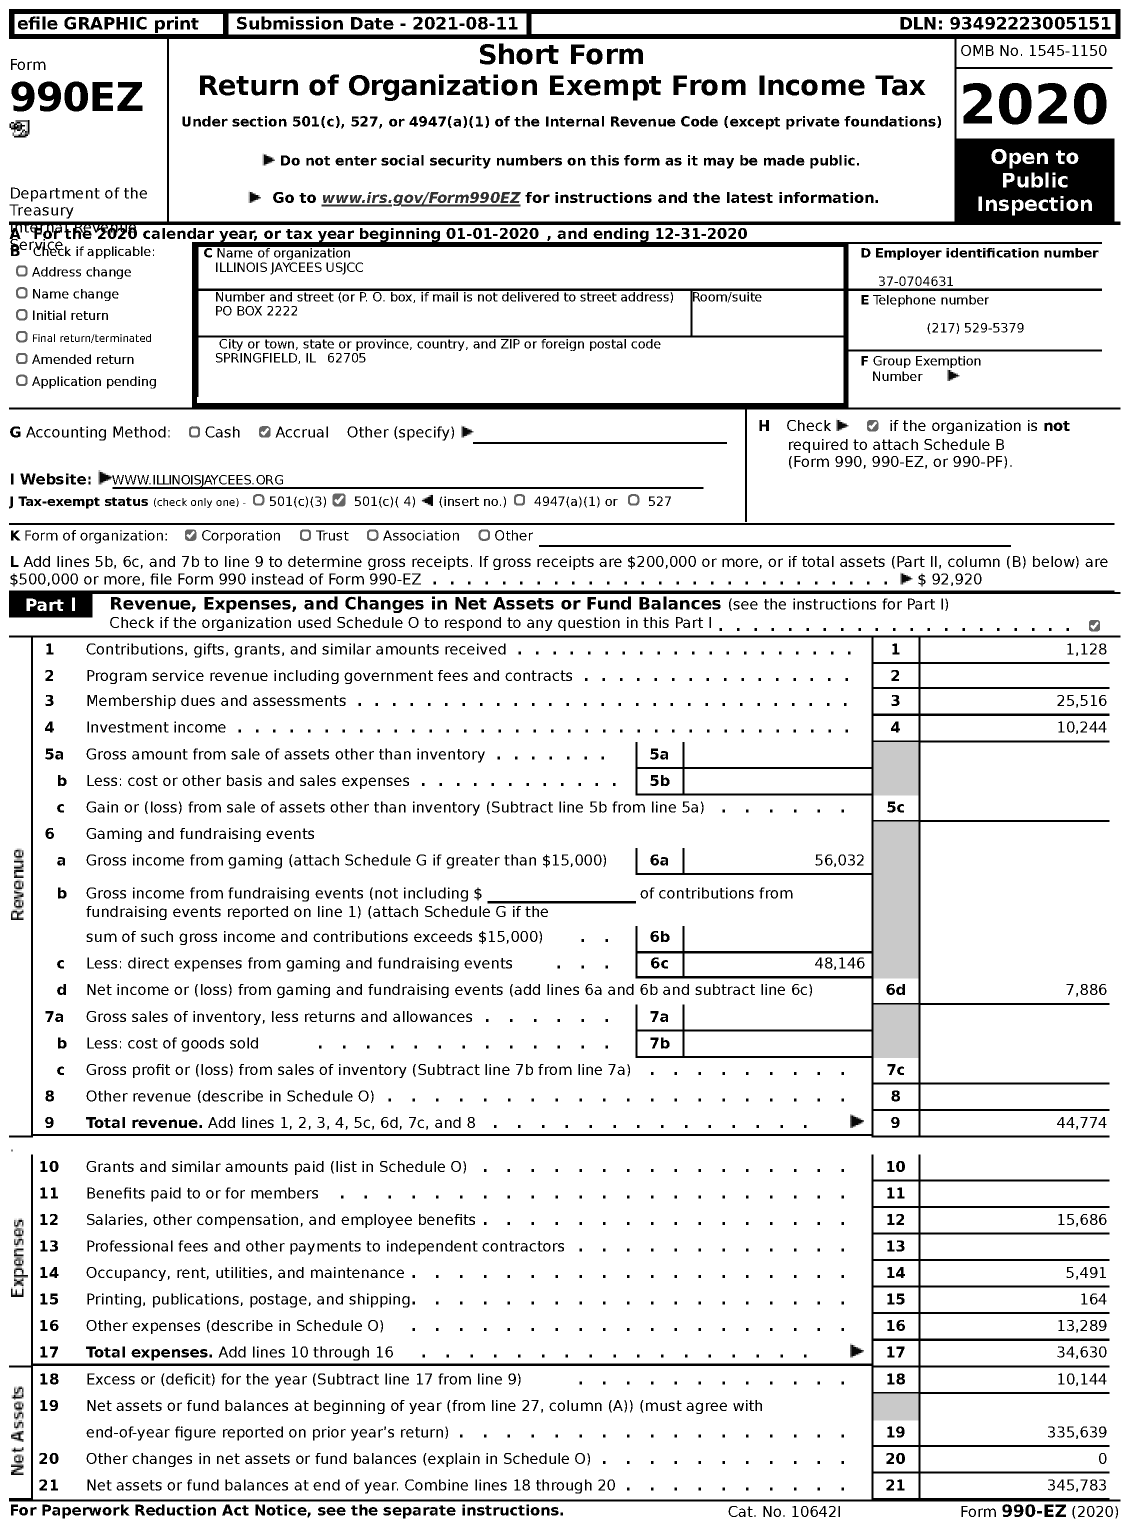 Image of first page of 2020 Form 990EZ for Illinois Jaycees Usjcc